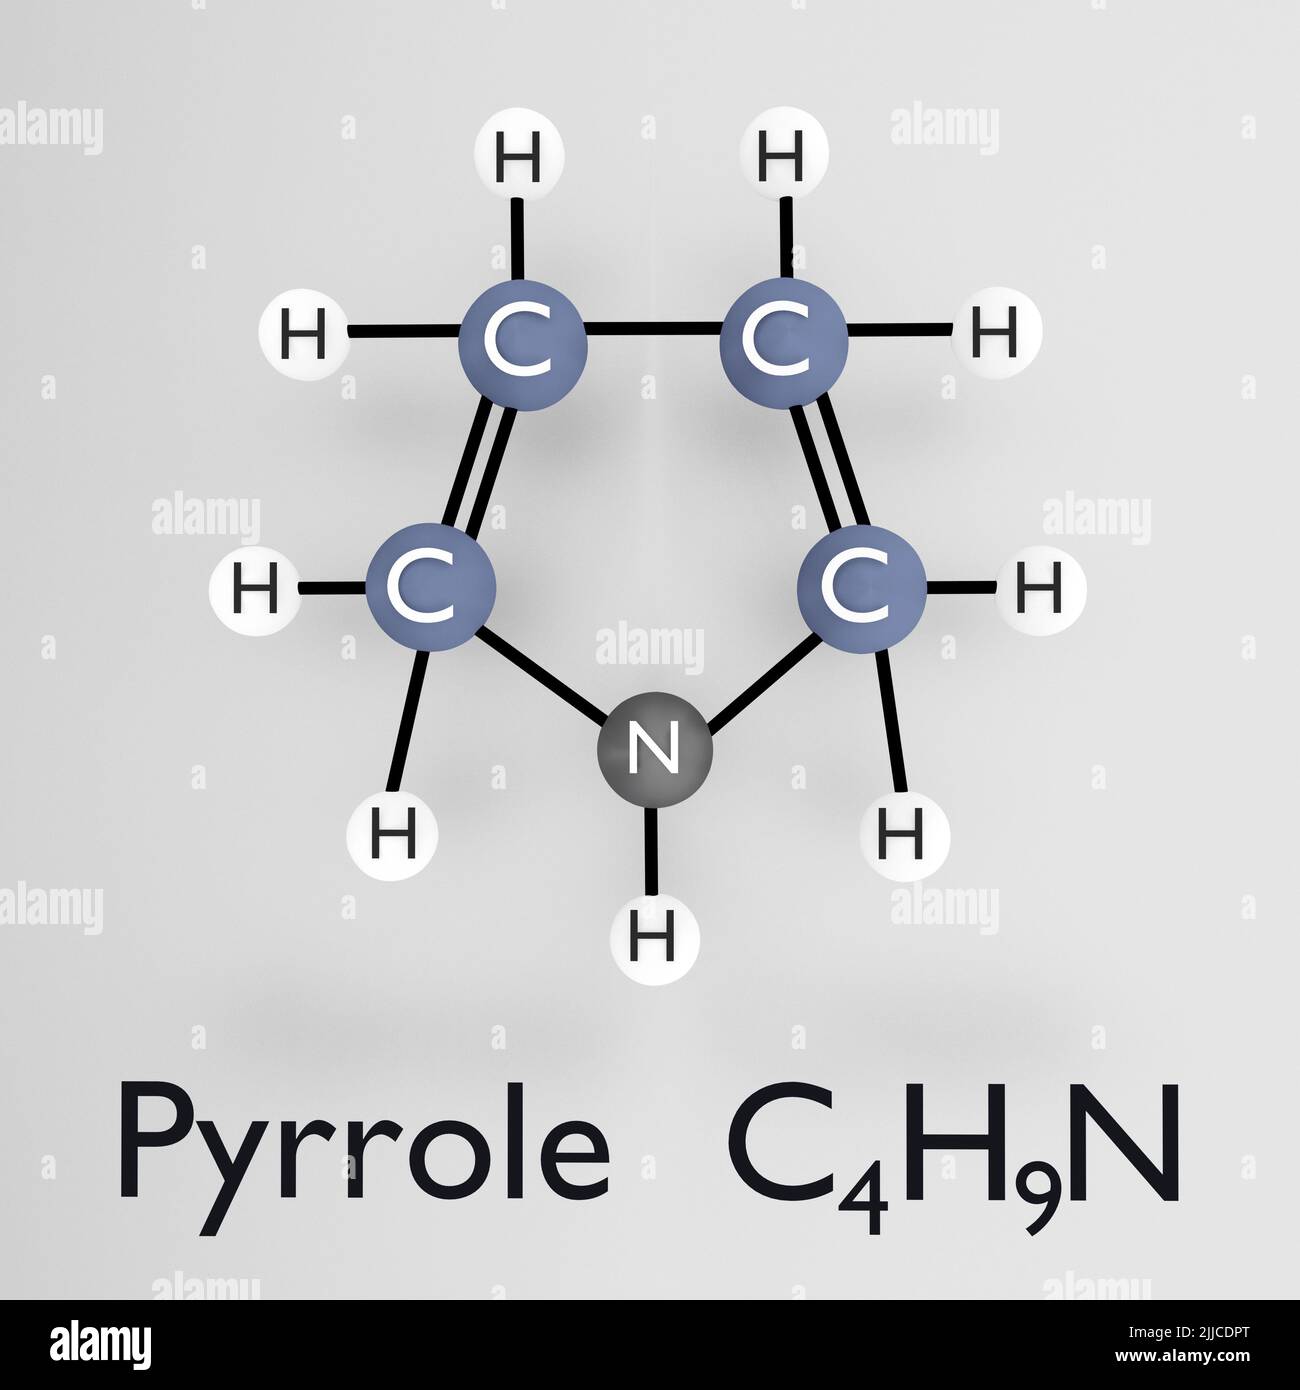 3D illustration of pyrrole molecule composed of carbon, hydrogen, nitrogen and oxygen atoms, isolated over gray background. Stock Photo